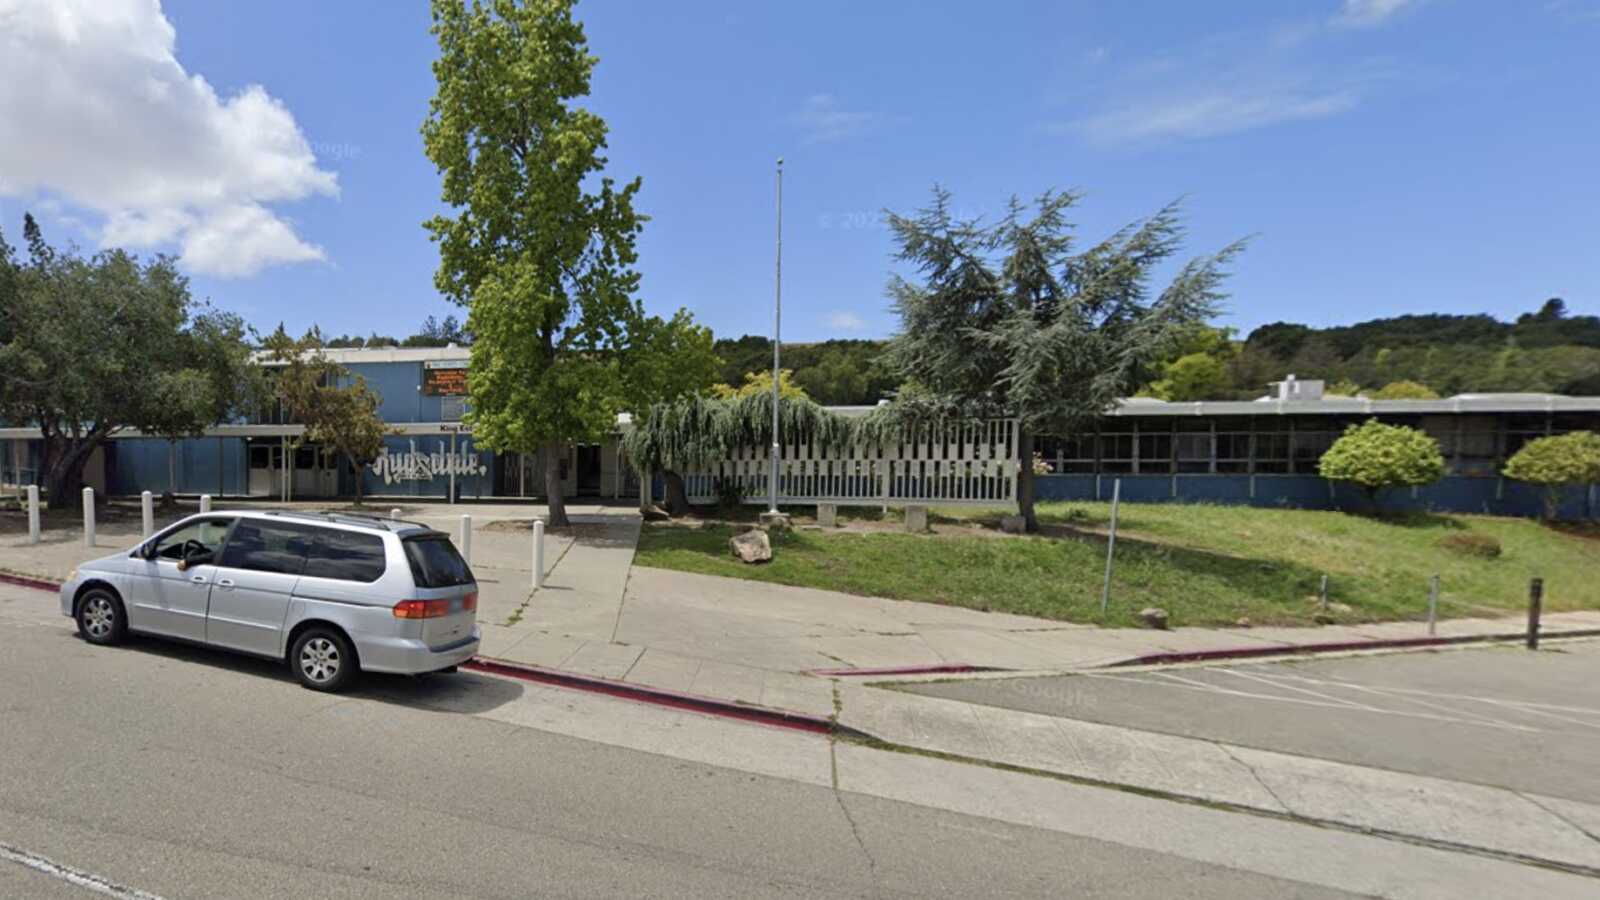 6 Wounded in Shooting on Oakland Schools Campus – Crime Online